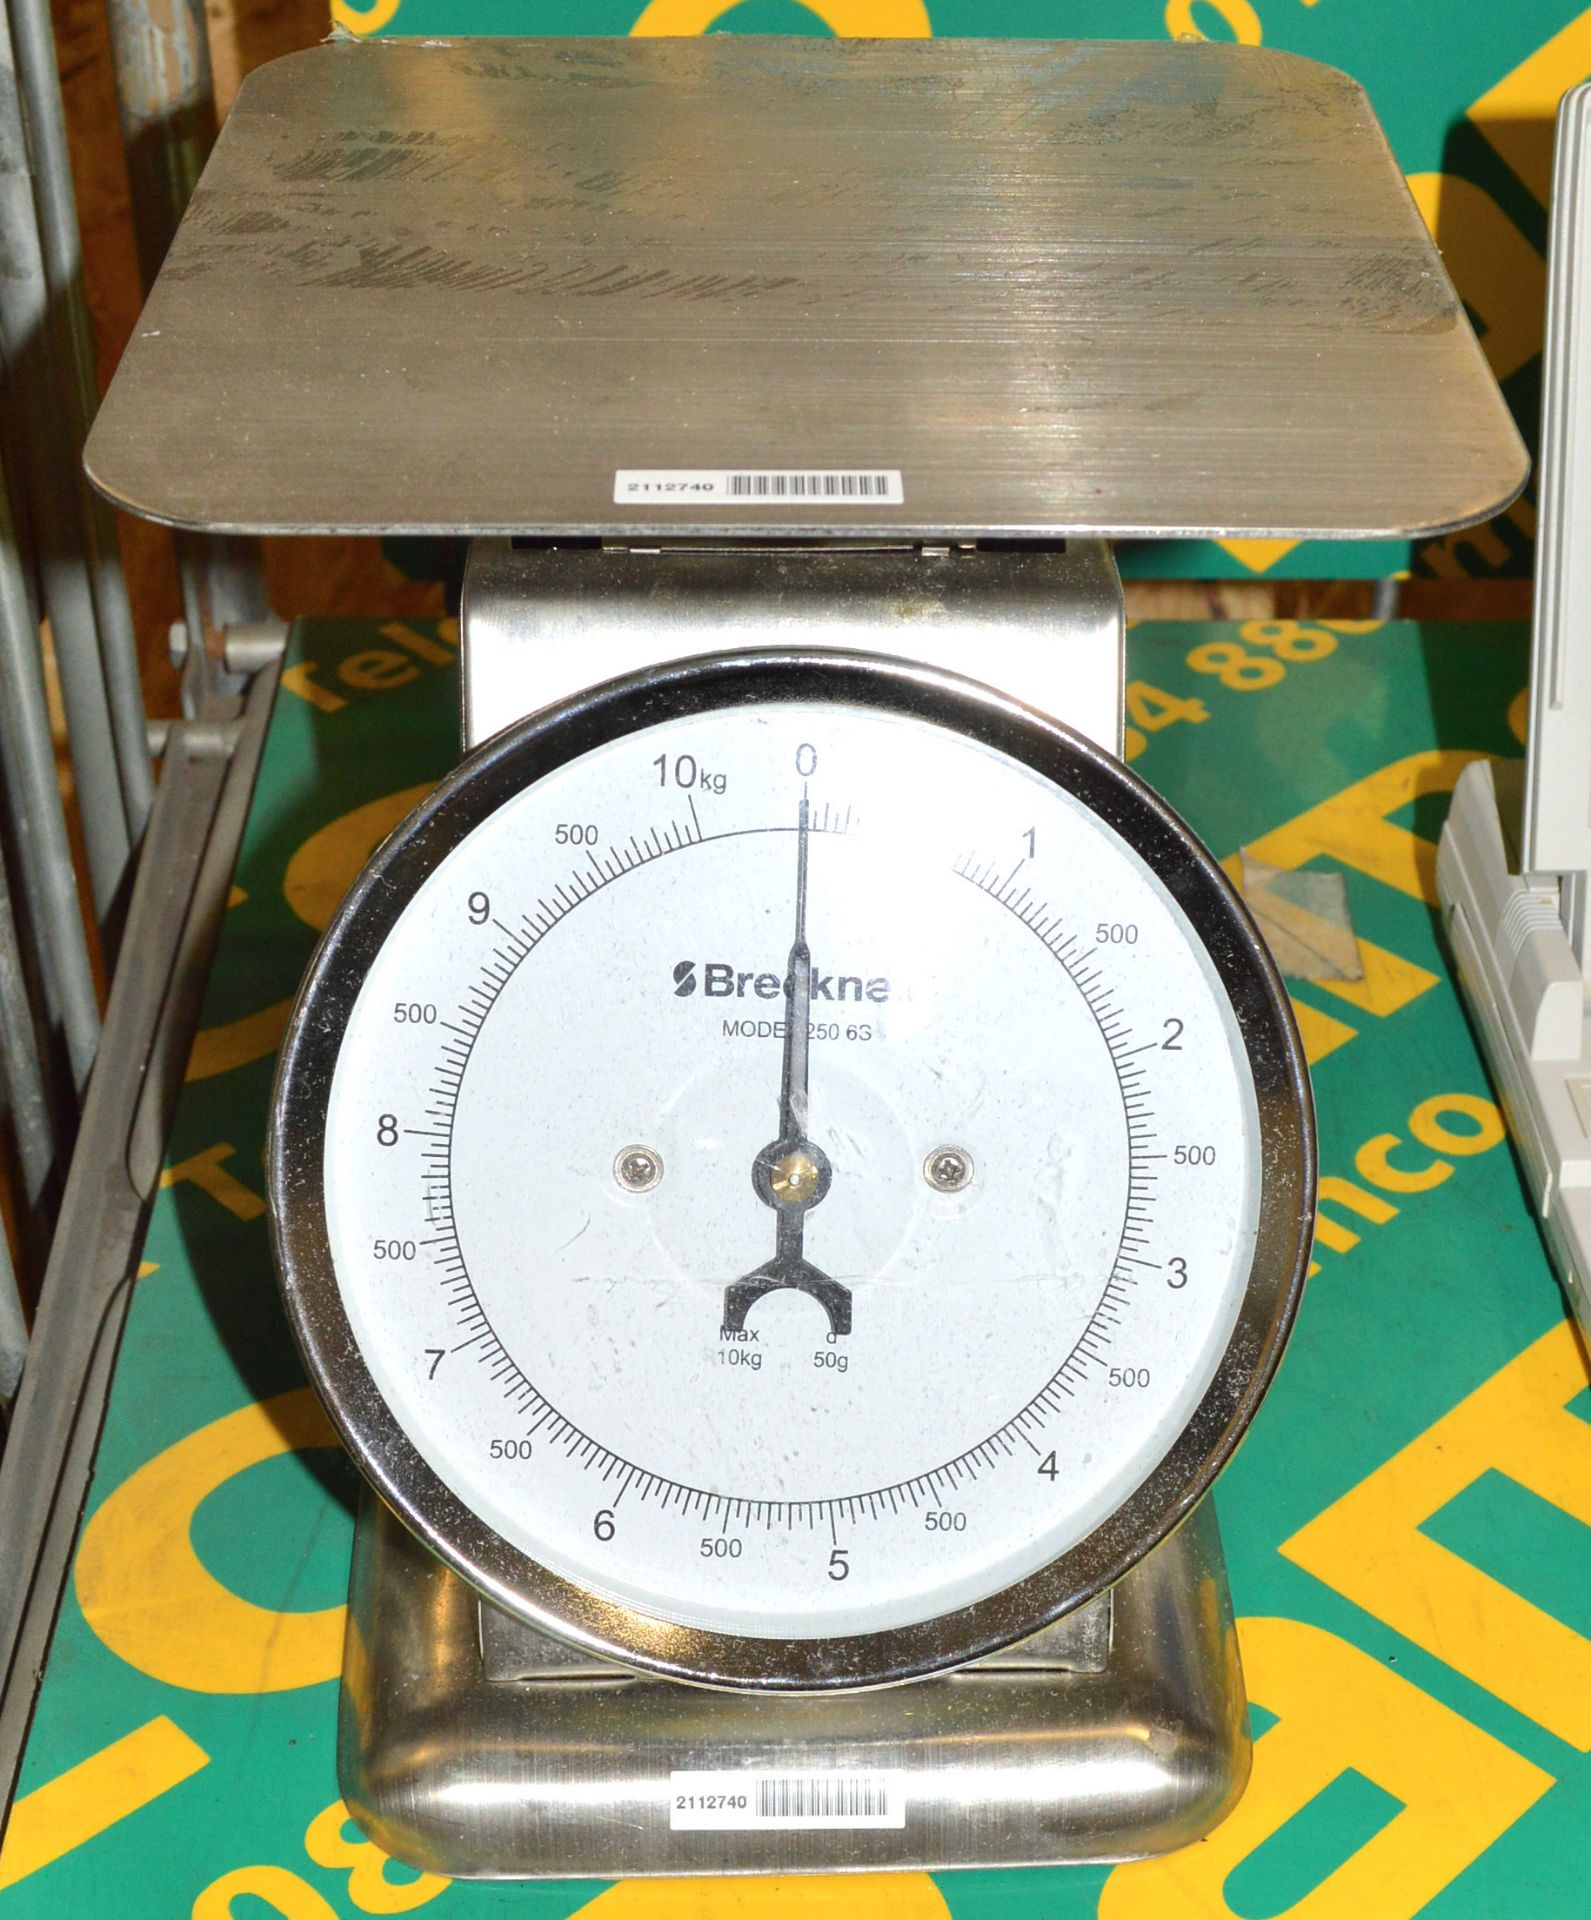 Scales Weighing 10kg, Brecknell.